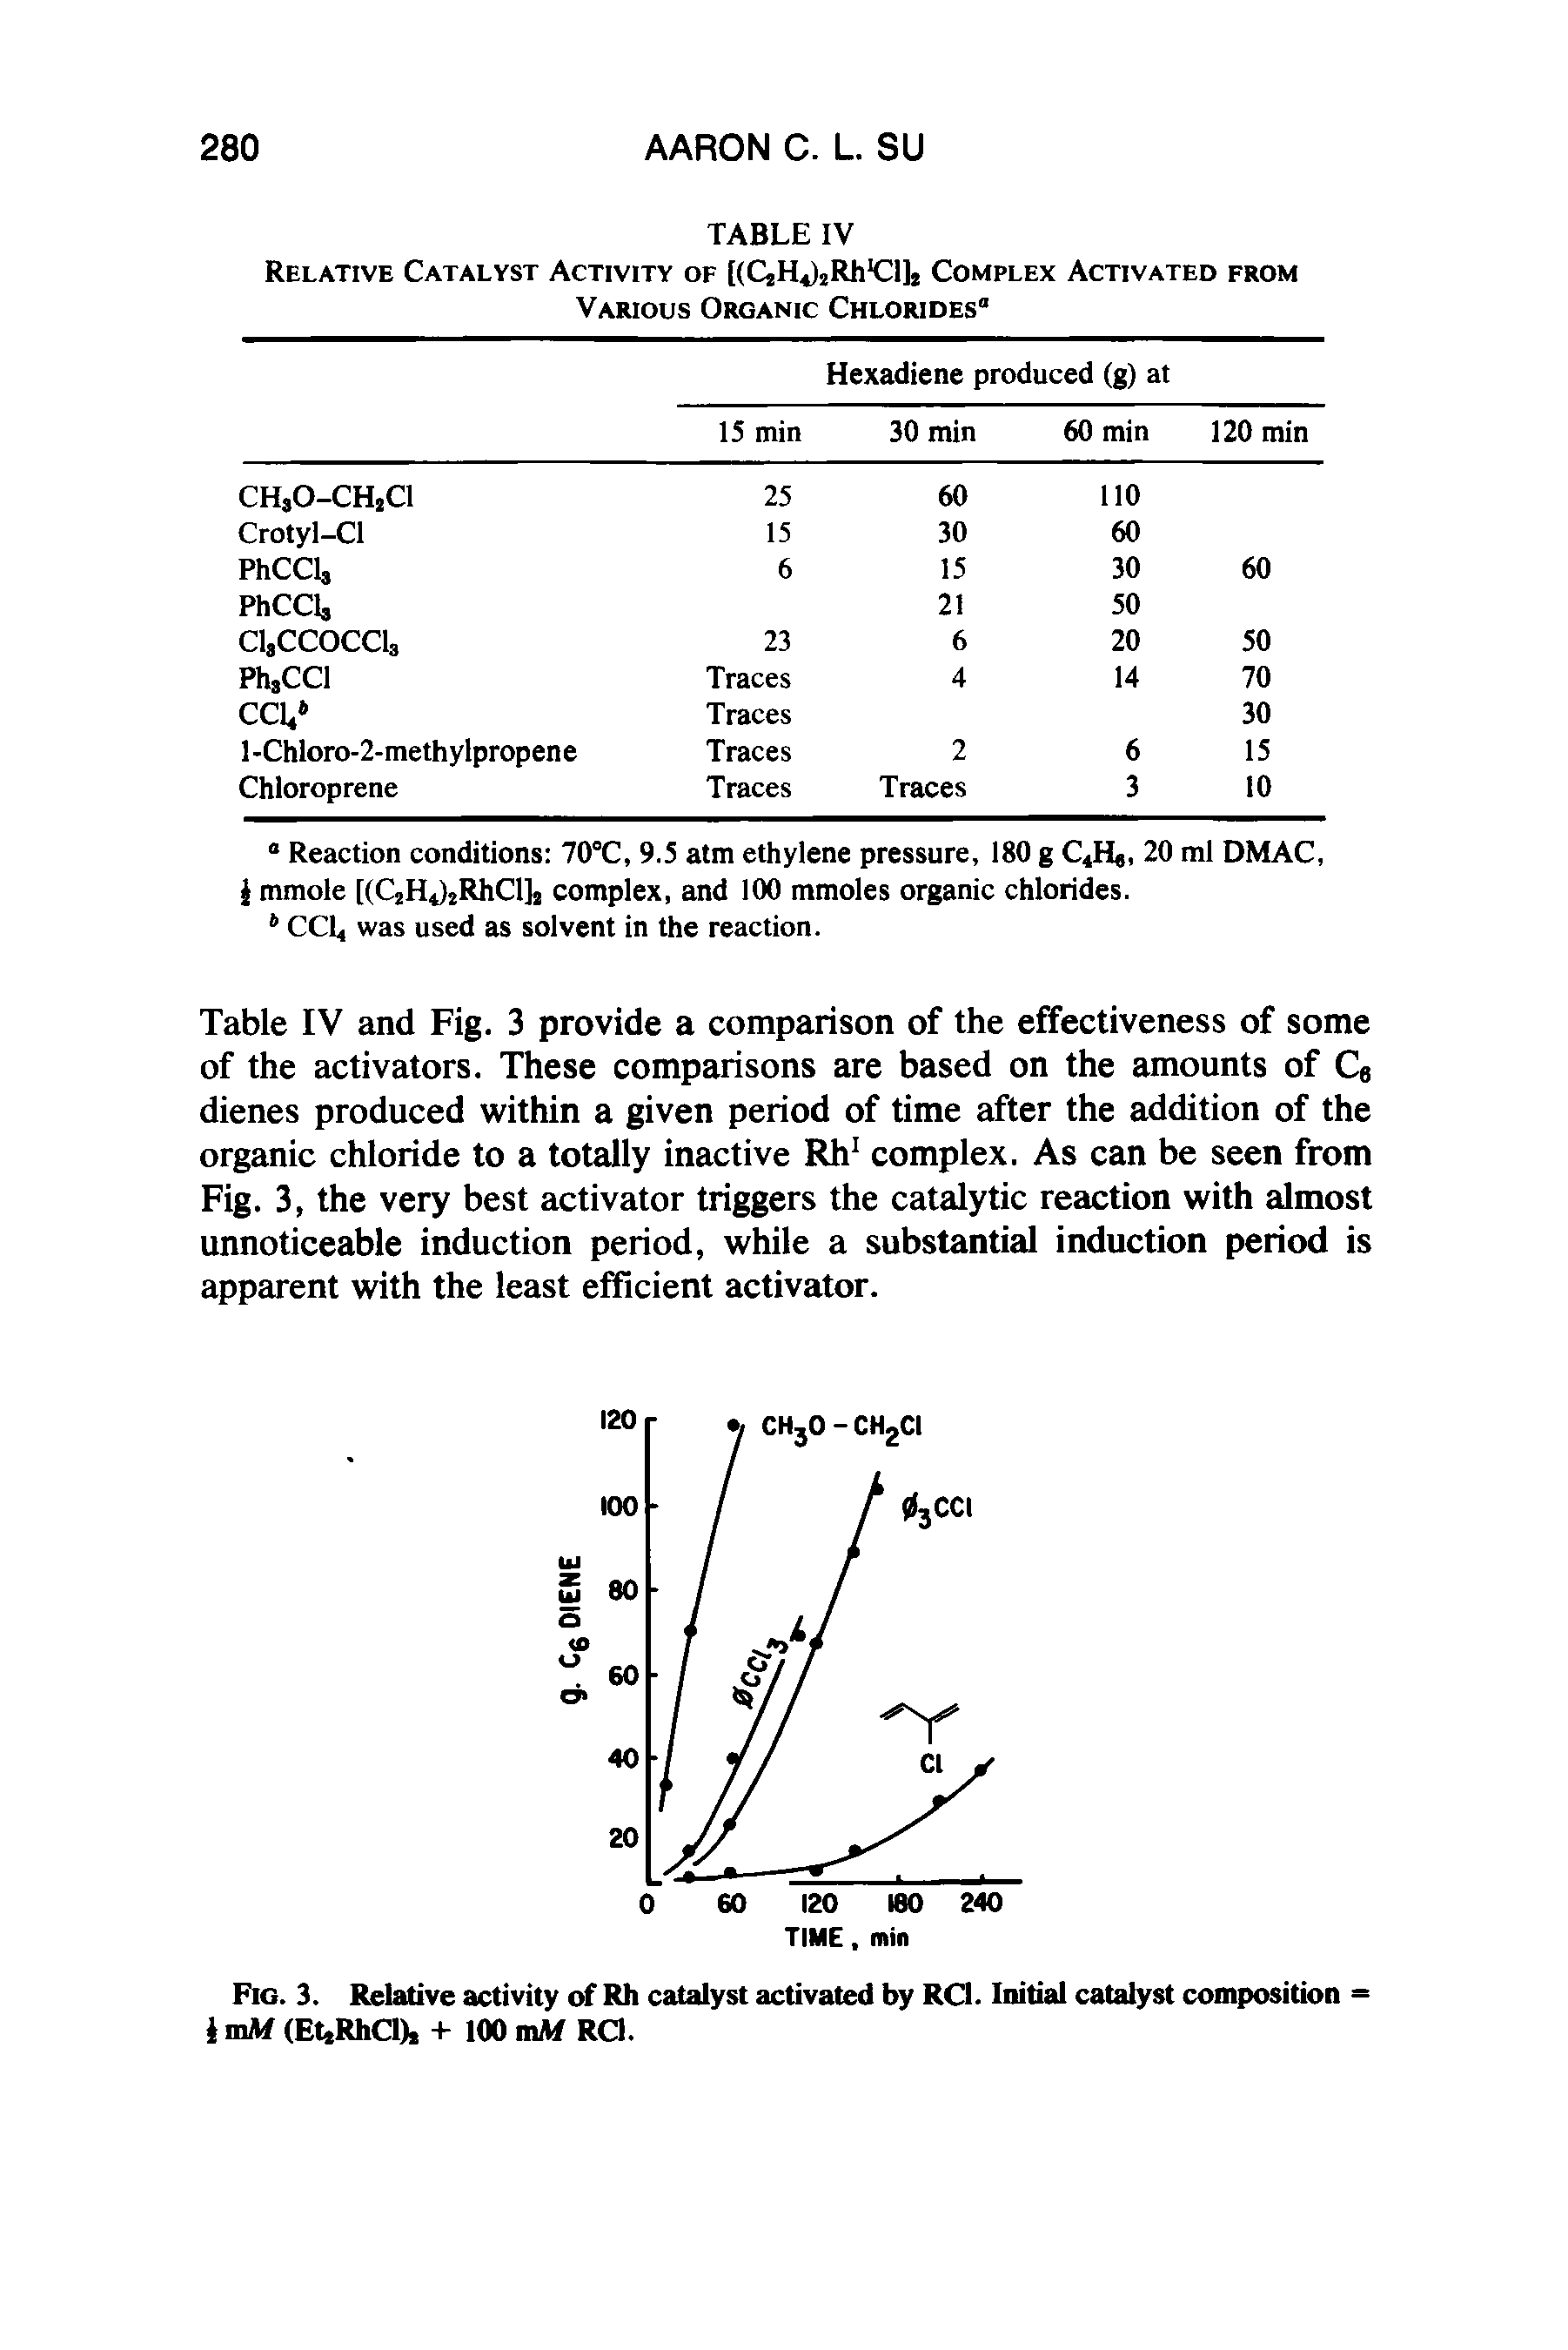 Table IV and Fig. 3 provide a comparison of the effectiveness of some of the activators. These comparisons are based on the amounts of C6 dienes produced within a given period of time after the addition of the organic chloride to a totally inactive Rh1 complex. As can be seen from Fig. 3, the very best activator triggers the catalytic reaction with almost unnoticeable induction period, while a substantial induction period is apparent with the least efficient activator.